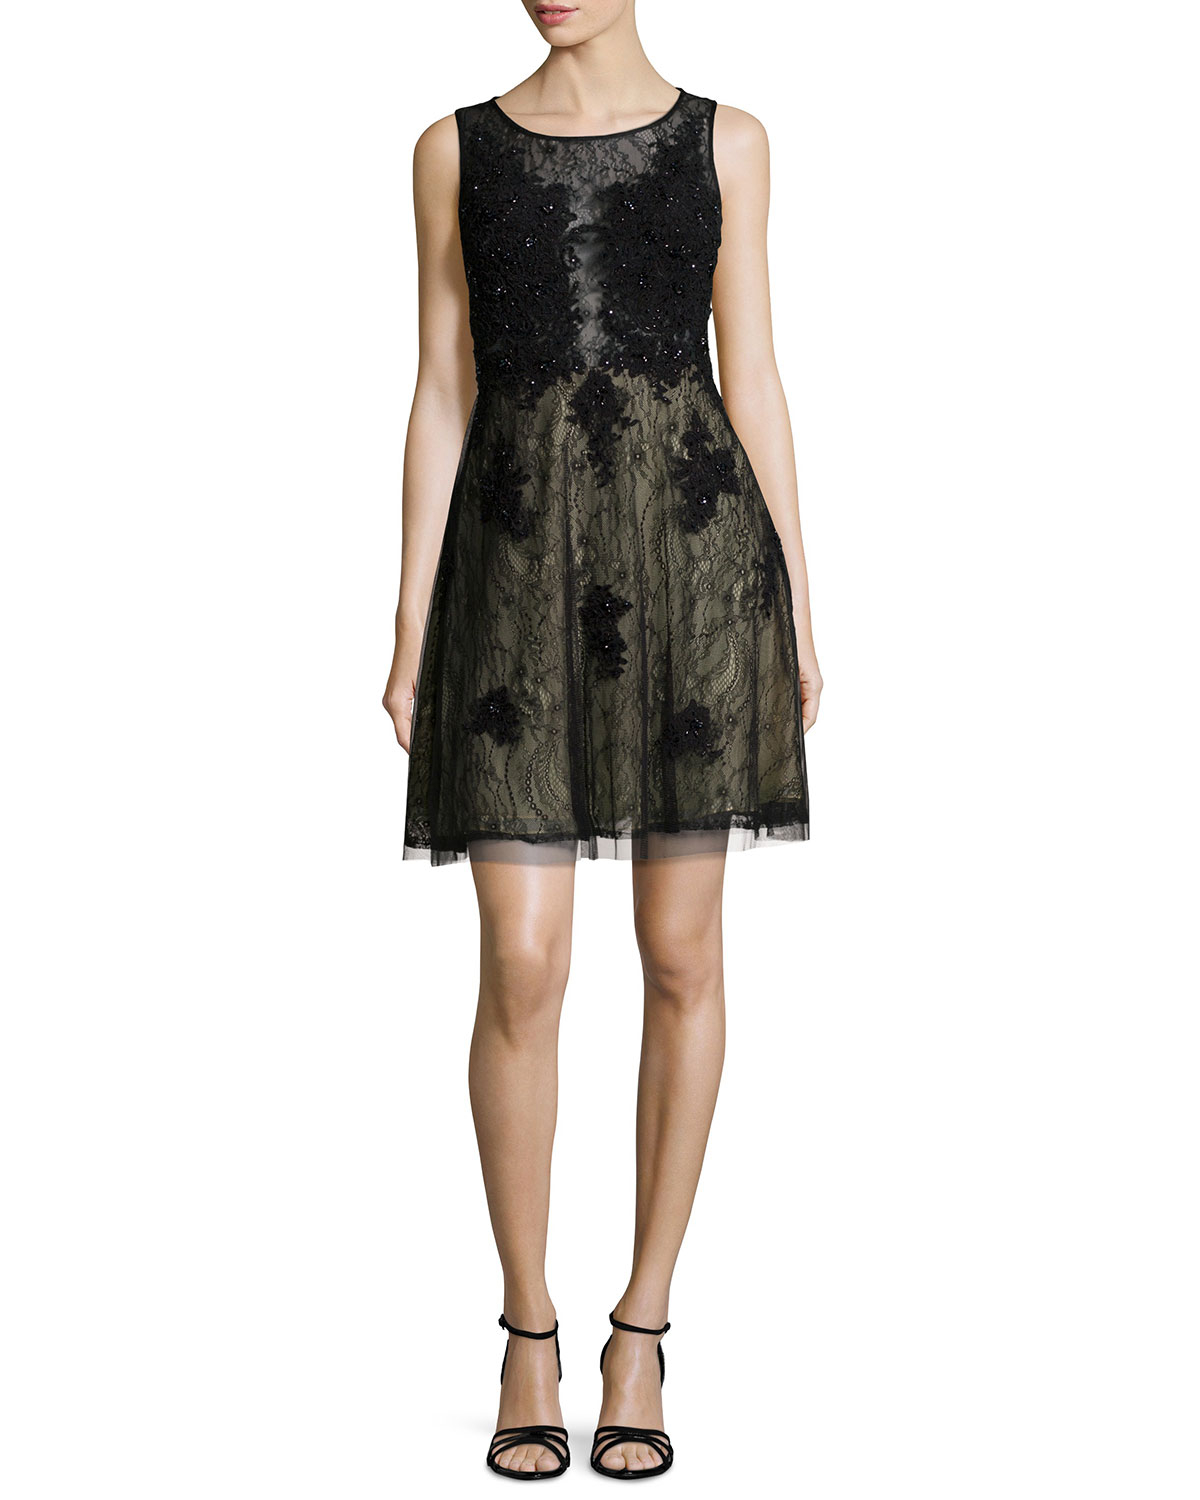 Lyst - Basix Black Label Sleeveless Beaded Lace Cocktail Dress in Black